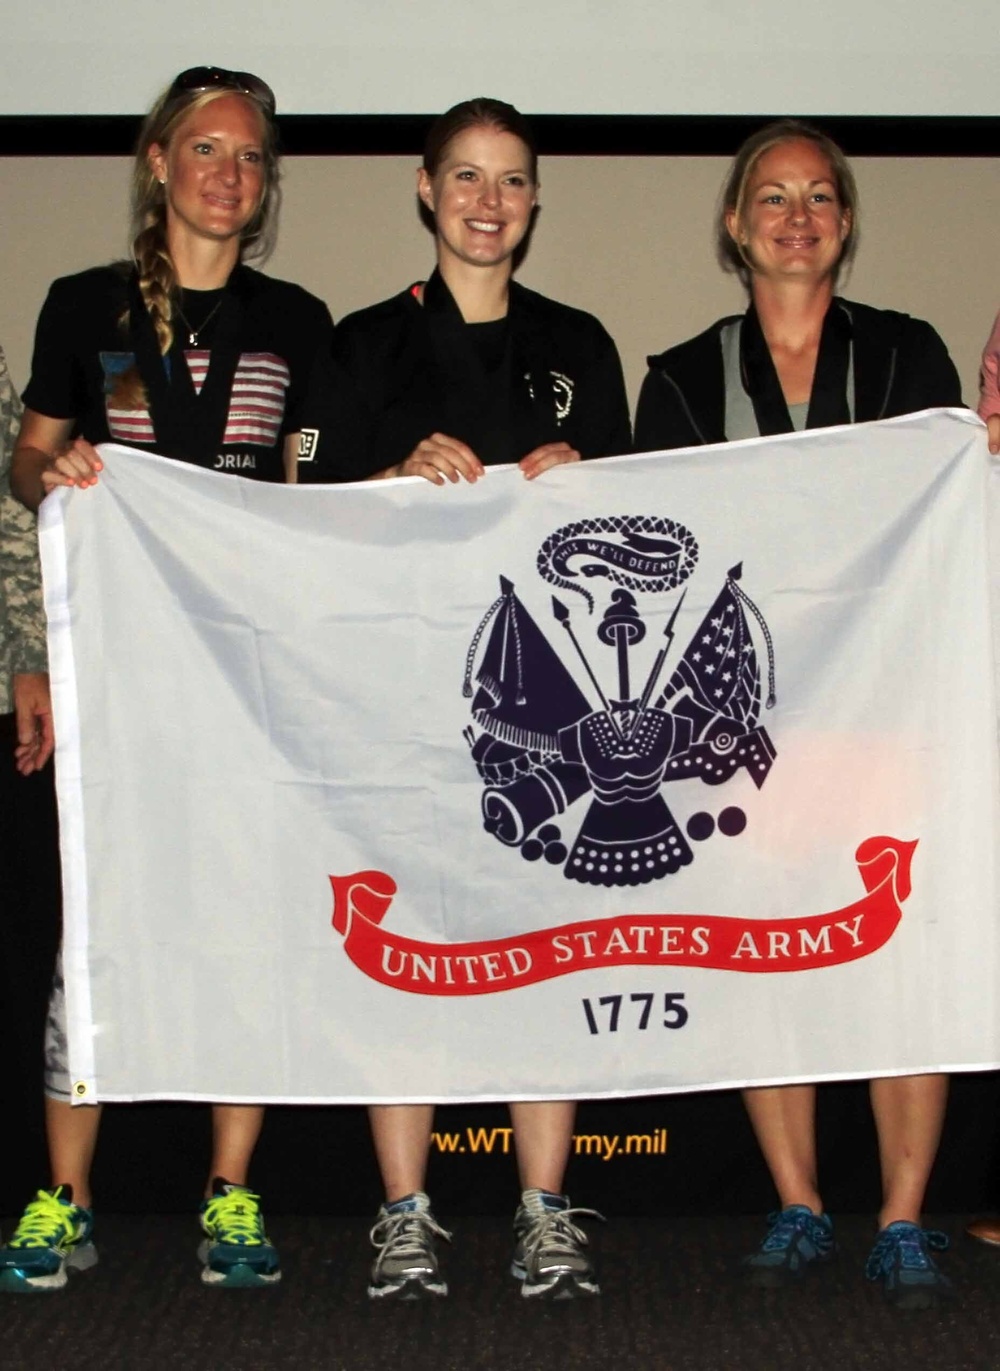 Winners of the women's 100 and 200 meter sprint at the 2014 US Army Warrior Trials